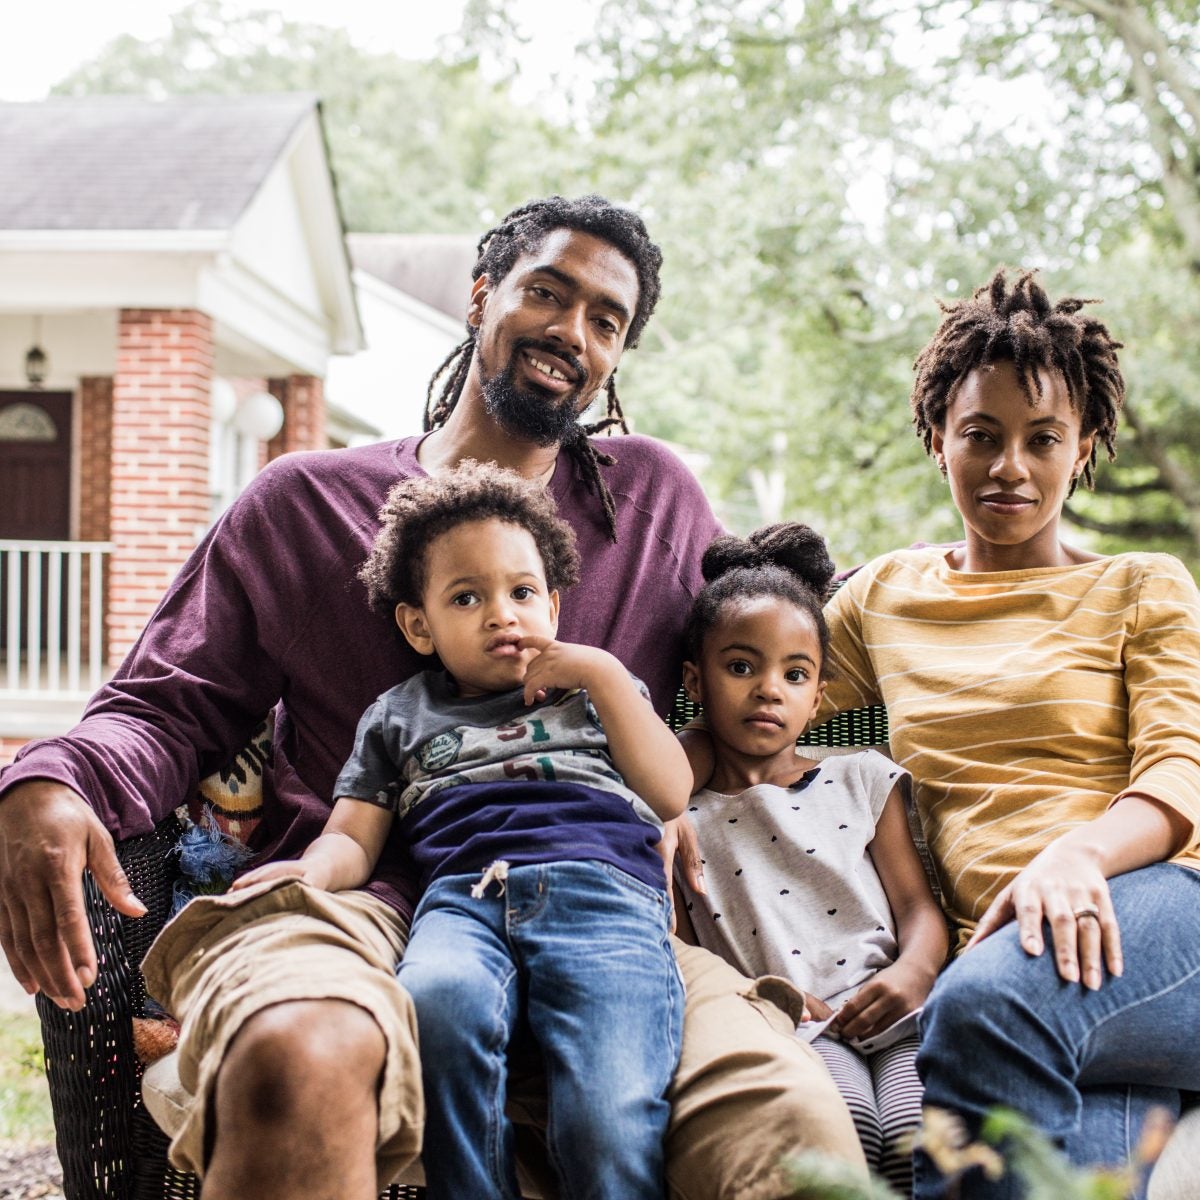 Black Millennial Wealth Trails Previous Generations of Black Americans by 52%, Study Shows